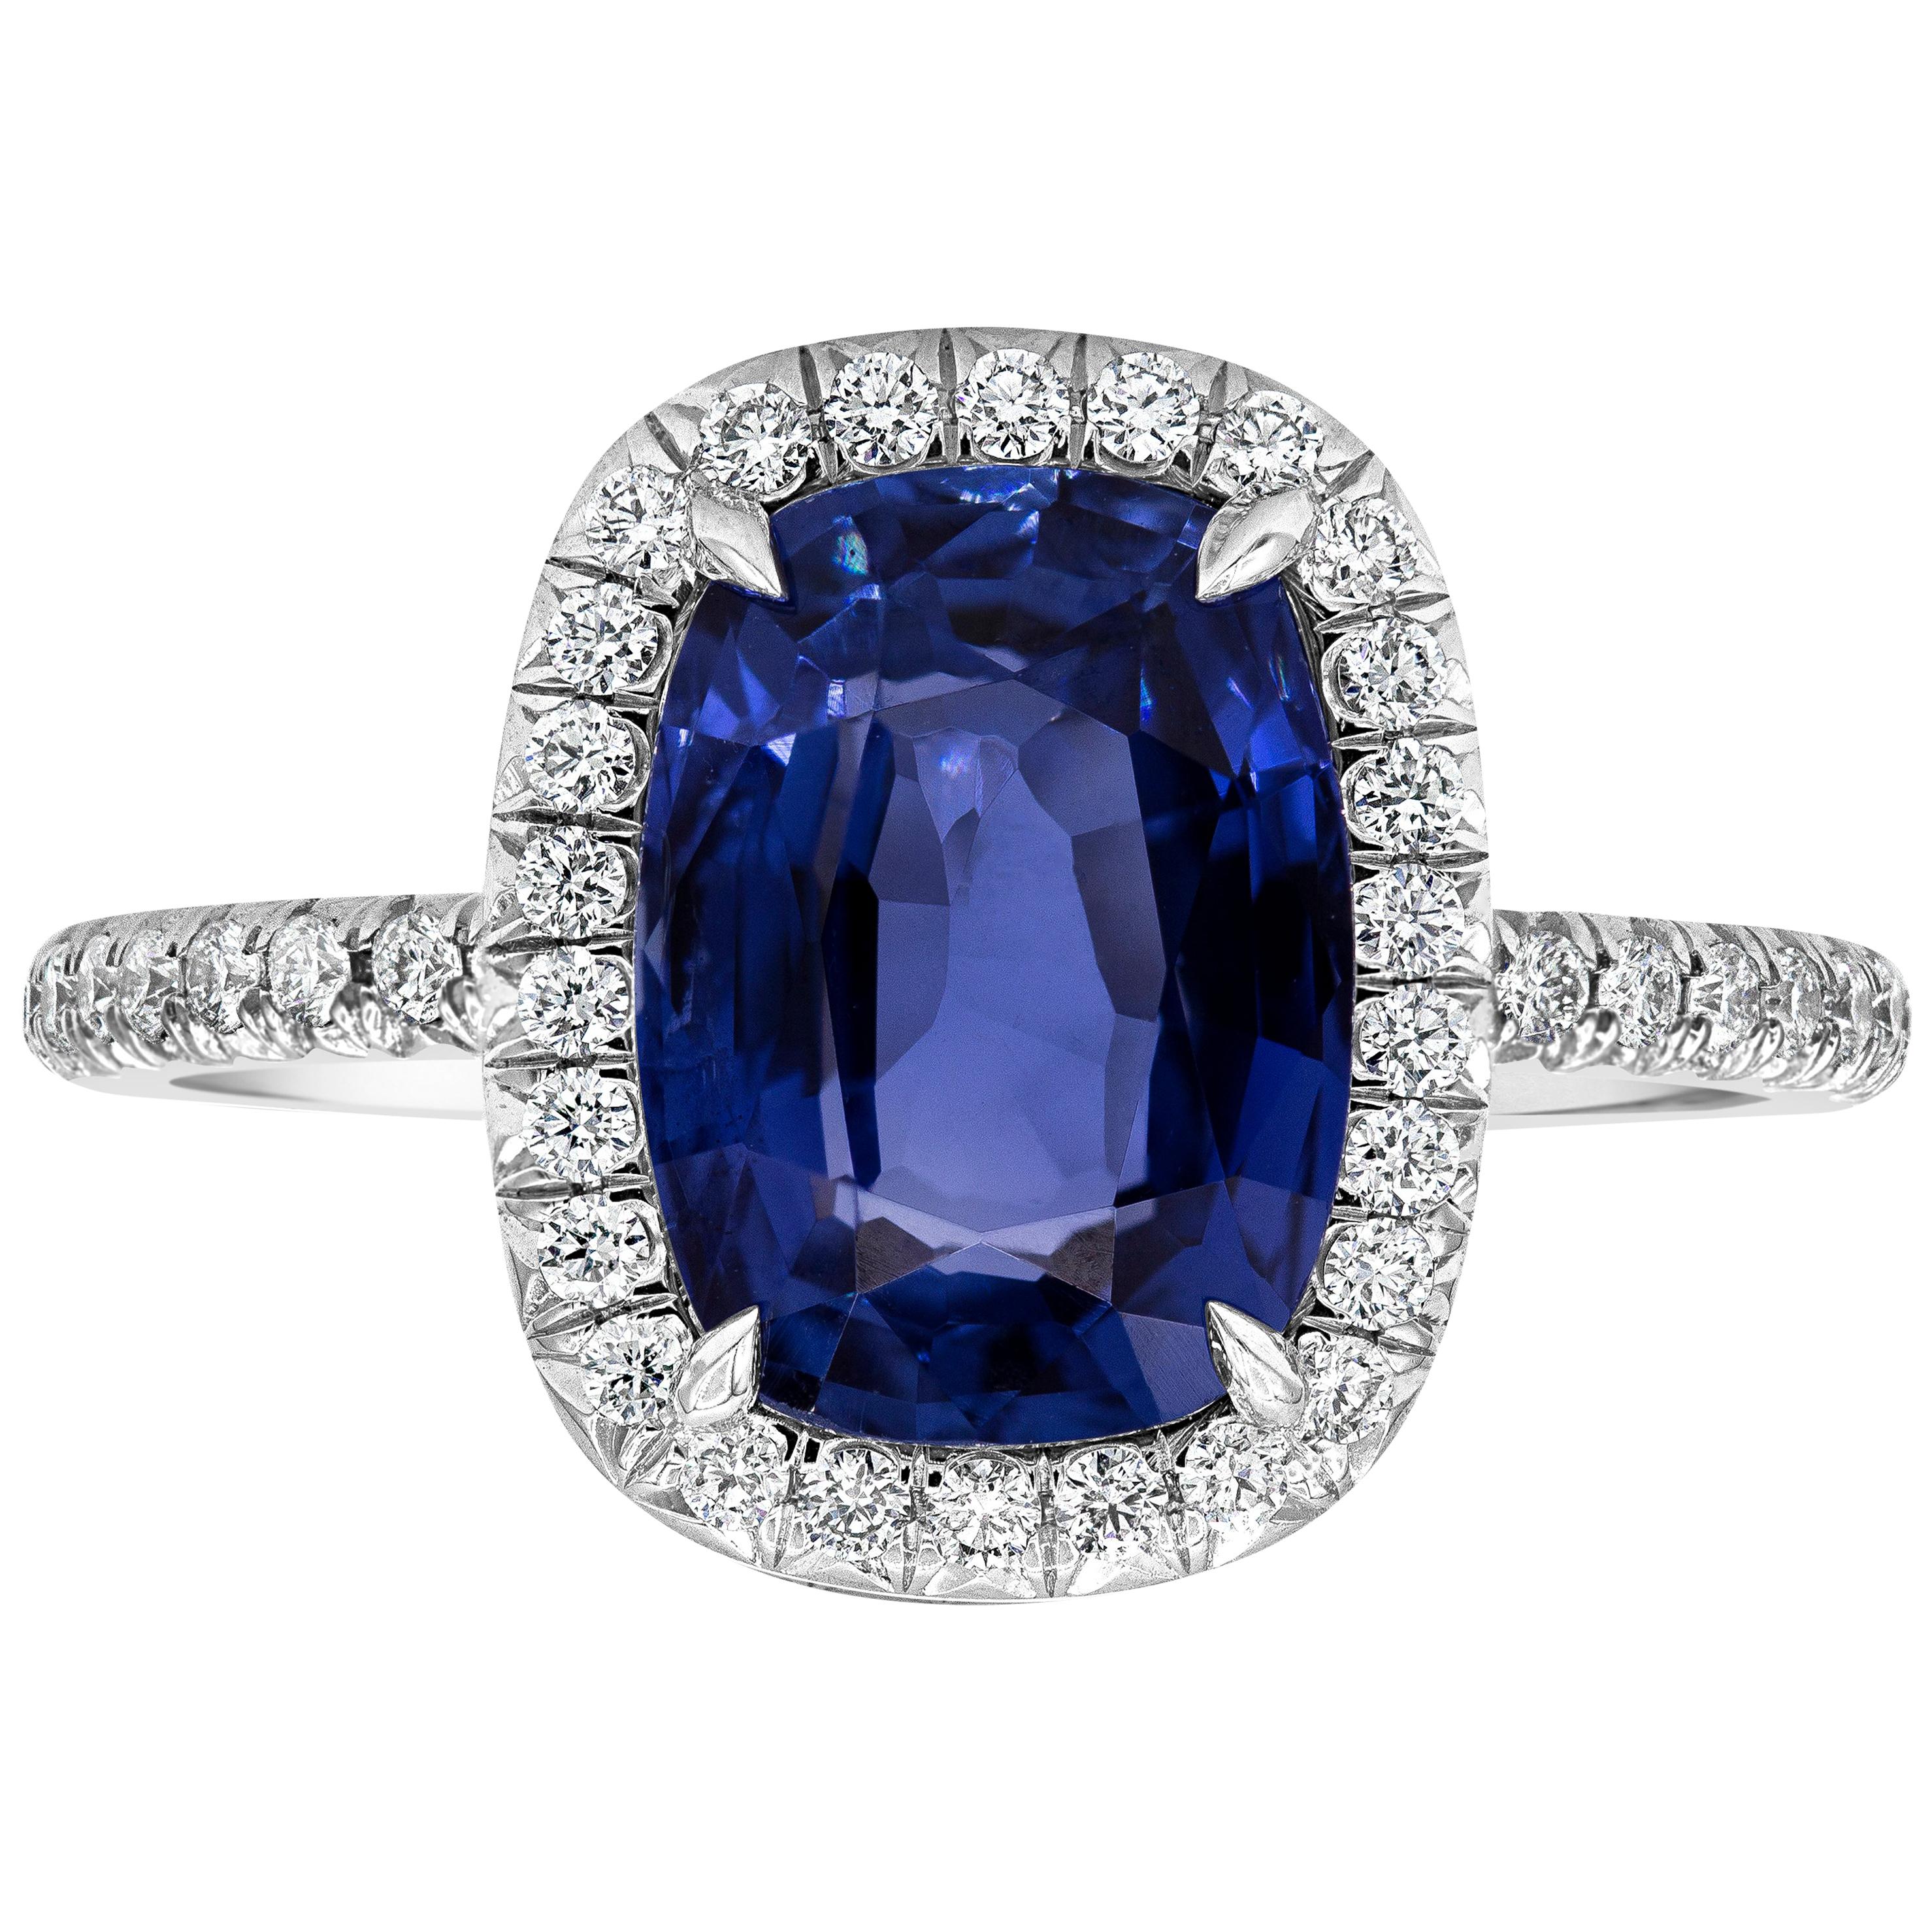 GIA Certified 3.37 Carats Cushion Cut Sapphire & Diamond Halo Engagement Ring